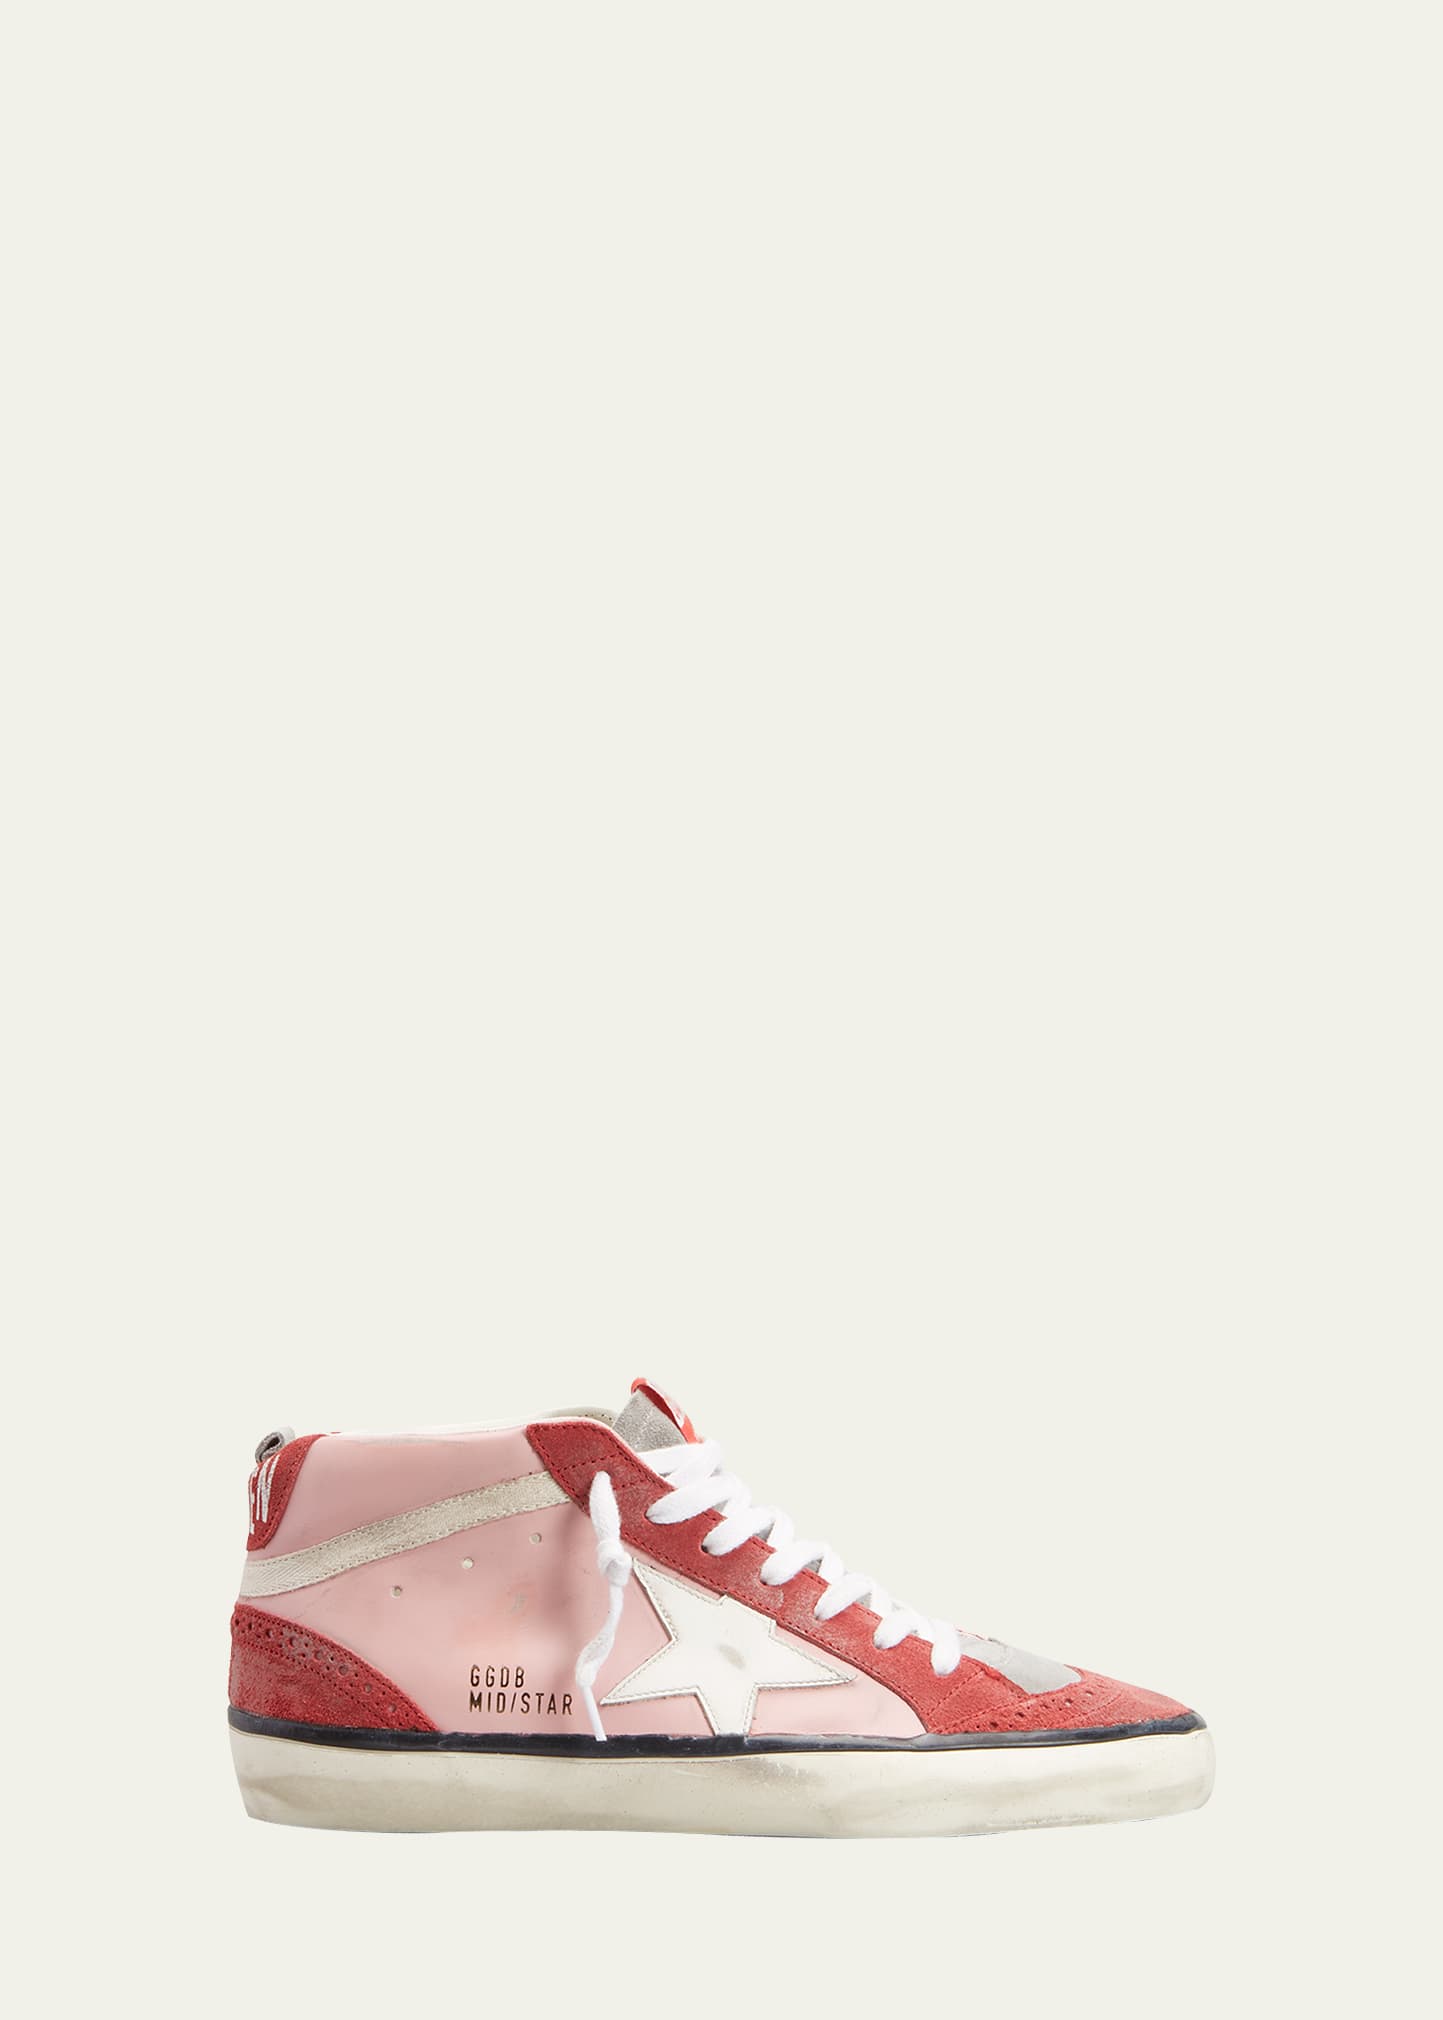 Golden Goose Mid Star Colorblock Wing-tip Sneakers In Antique Pinkredwh